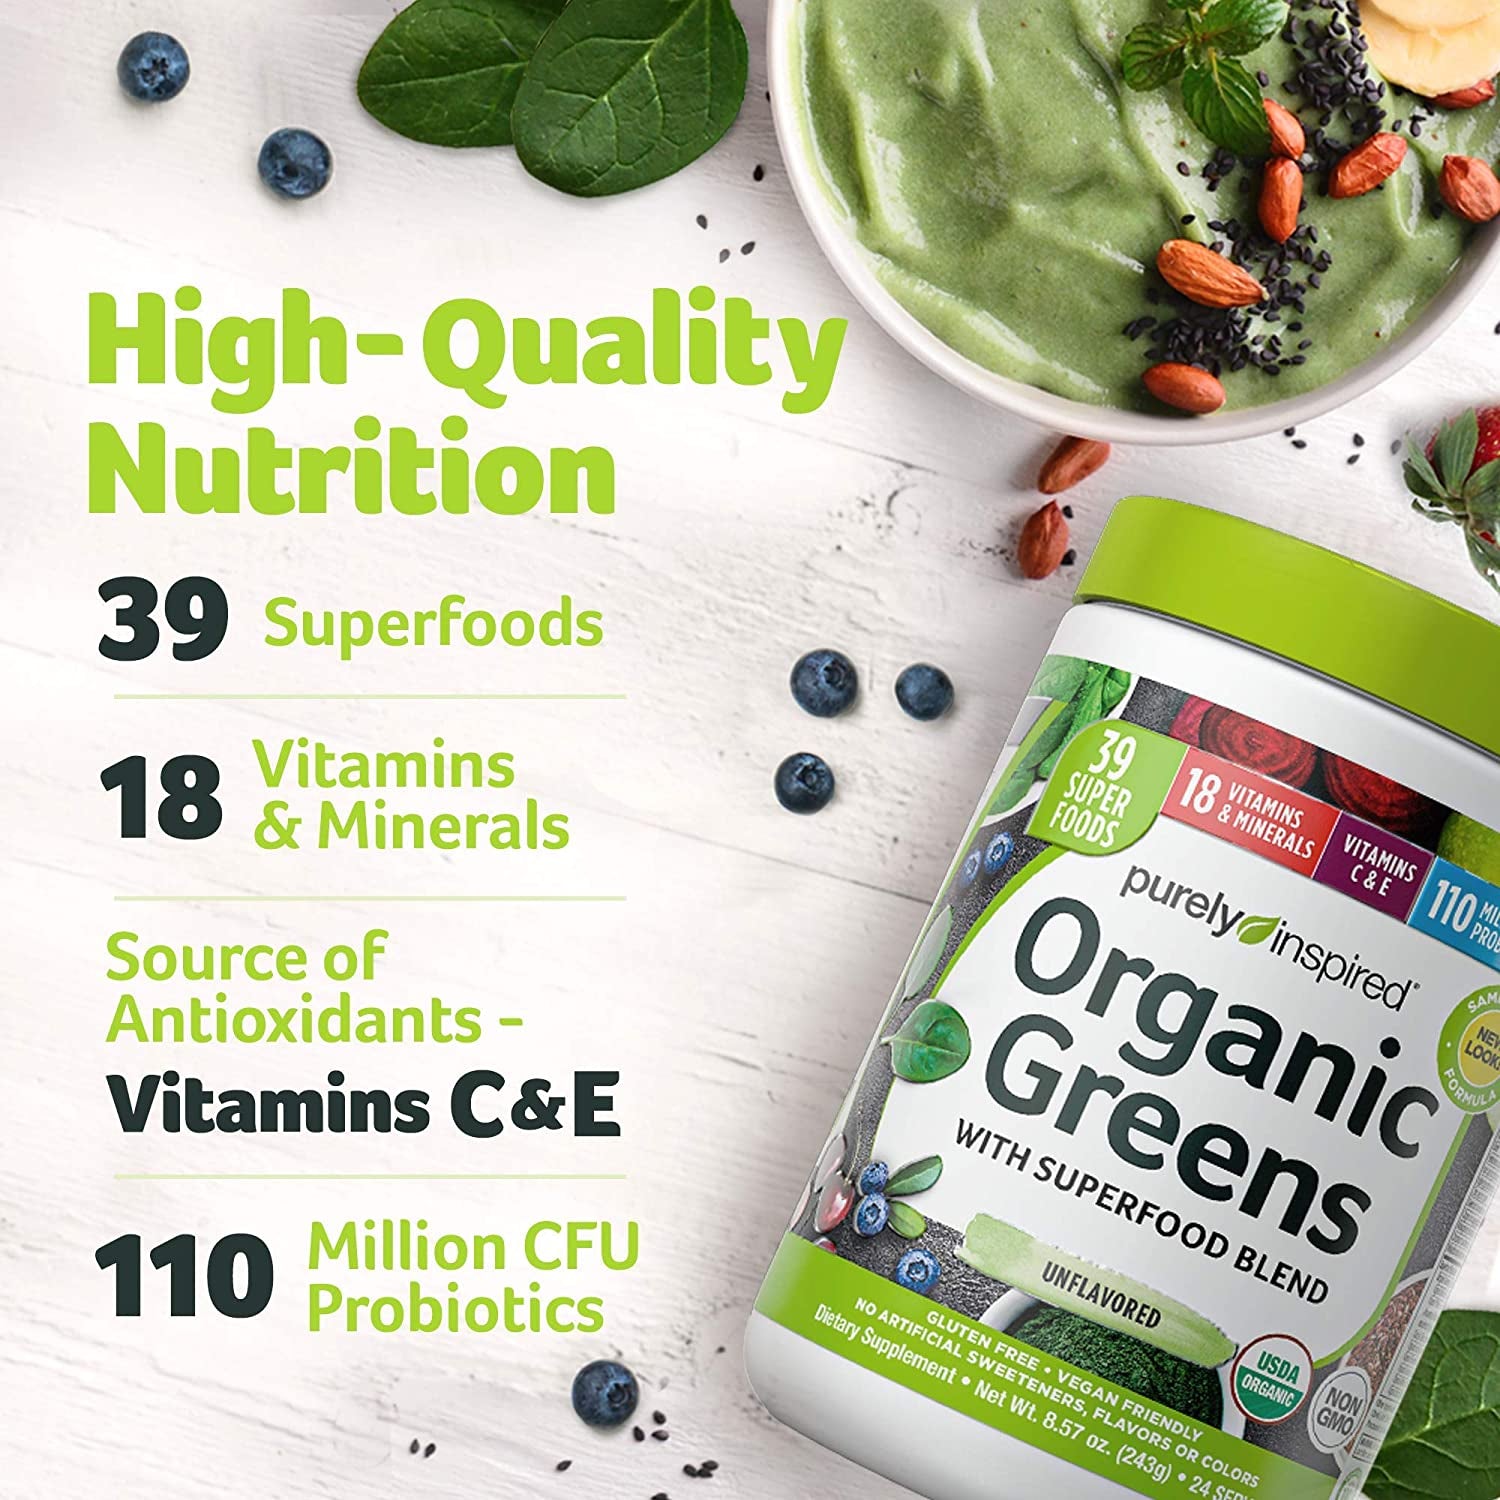 Purely Inspired Organic Greens Powder Superfood